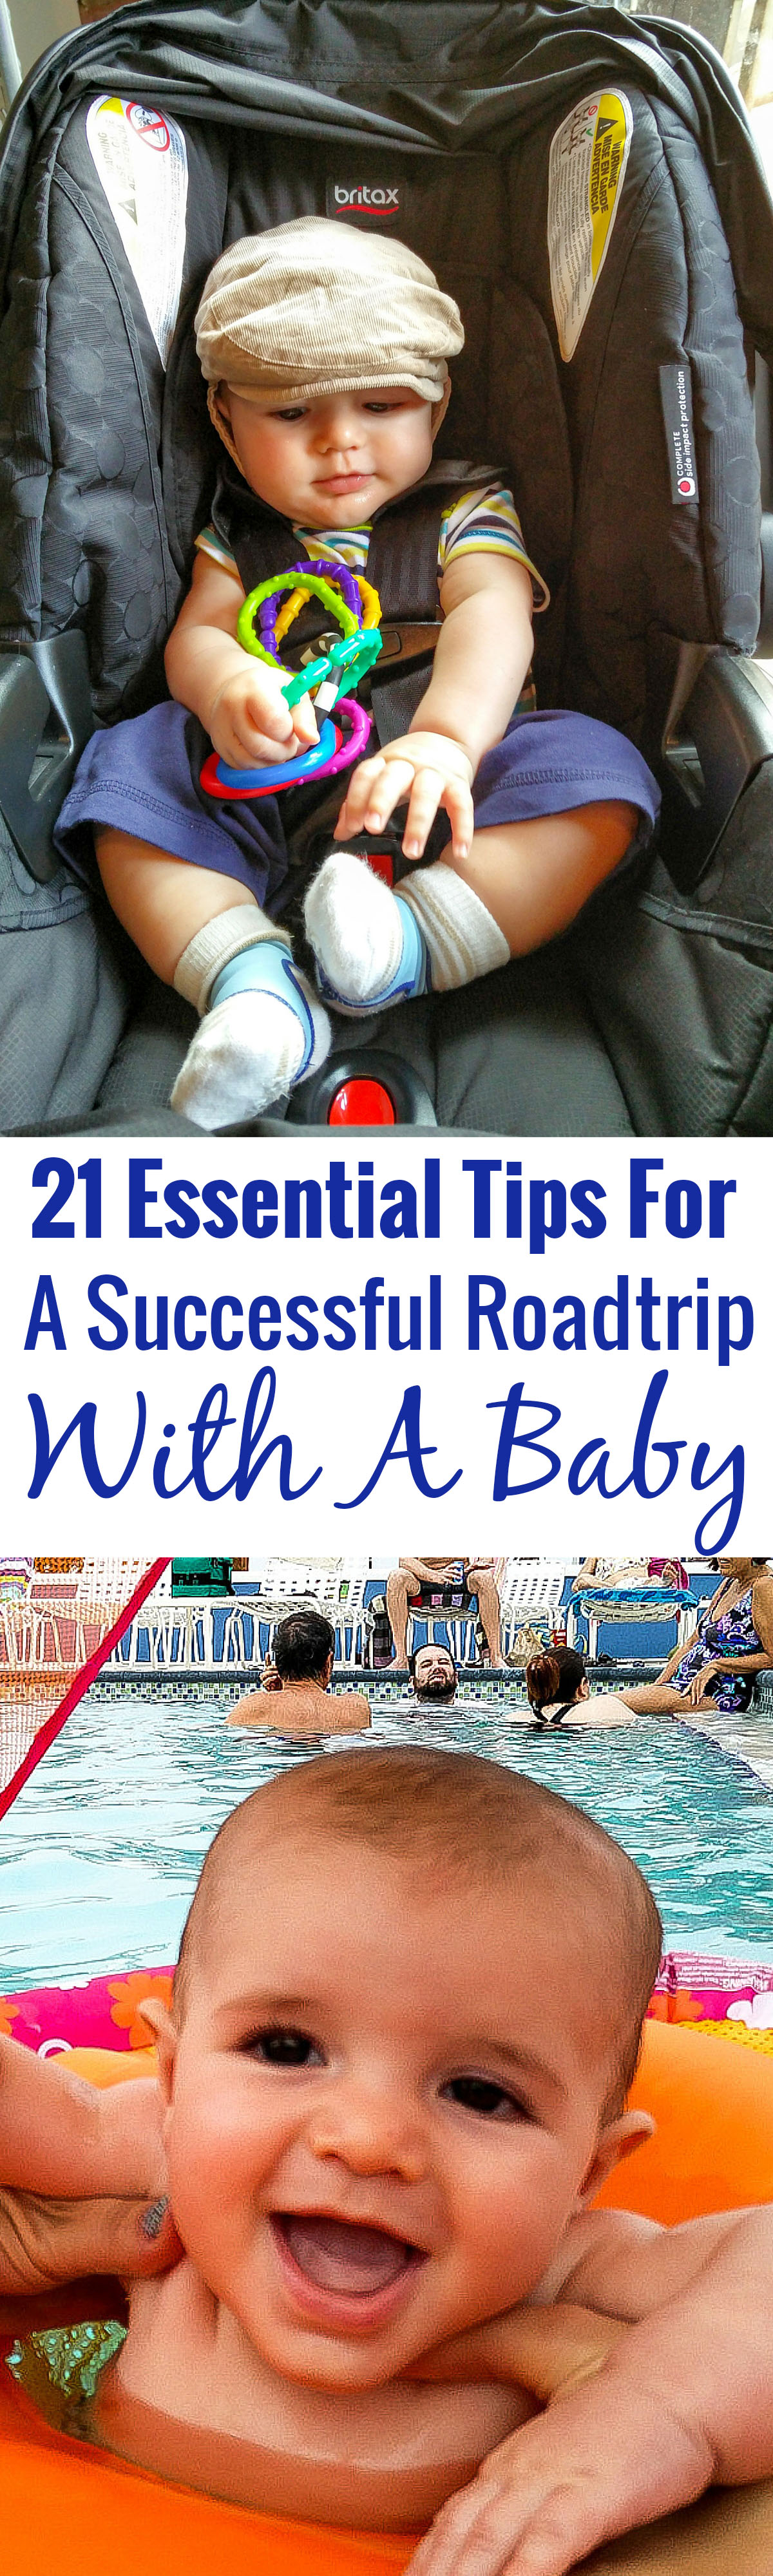 21 Essential Tips for Successful Road Trip with a Baby. Covering everything from what to pack to when to schedule the journey